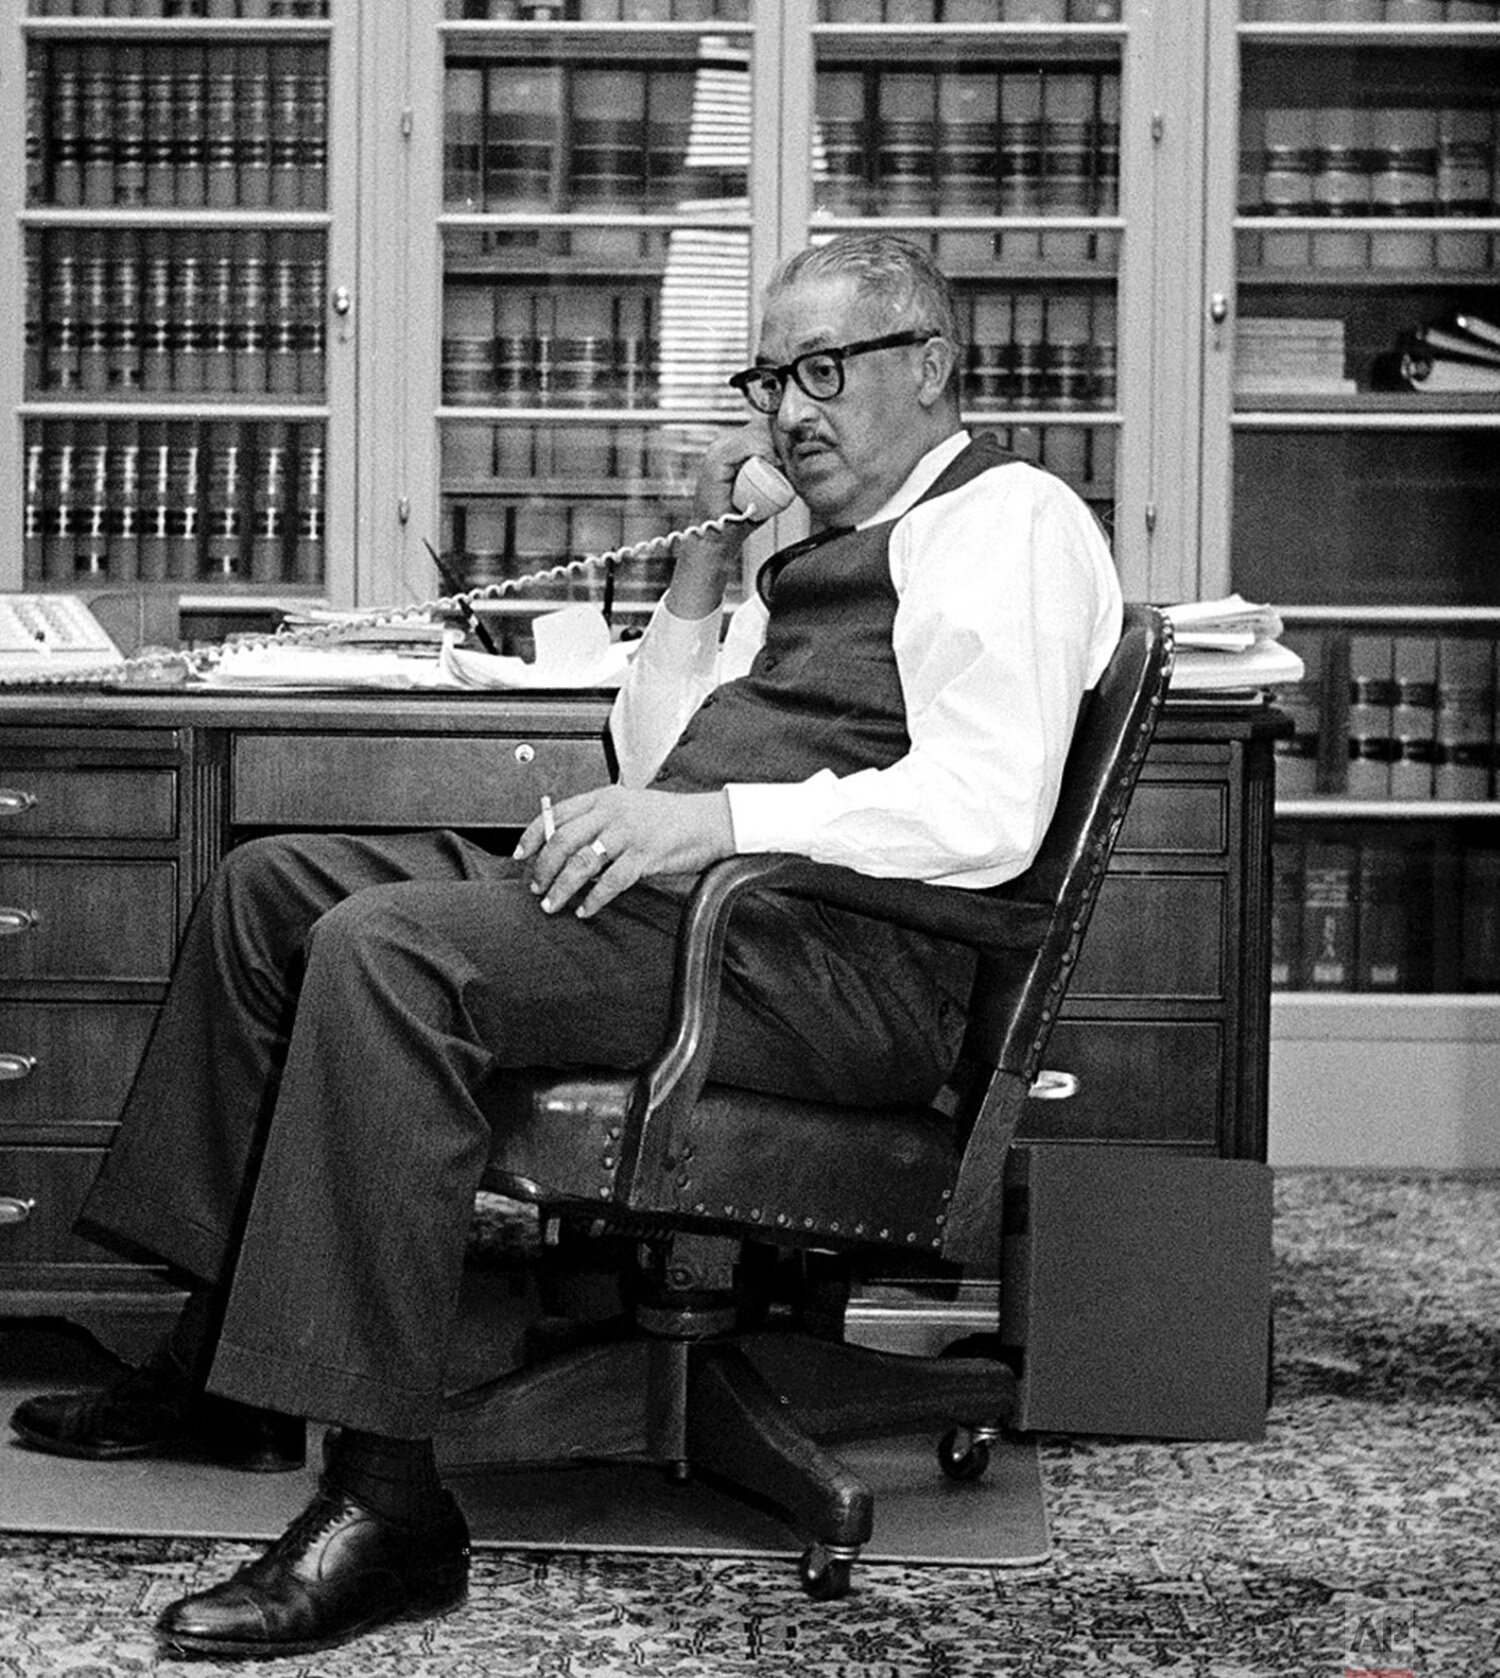  Thurgood Marshall, the new Solicitor General of the United States, talks on the phone in his Department of Justice office in Washington, Dec. 9, 1965.  Marshall, grandson of a slave, gave up a lifetime tenure as a Court of Appeals judge to become th